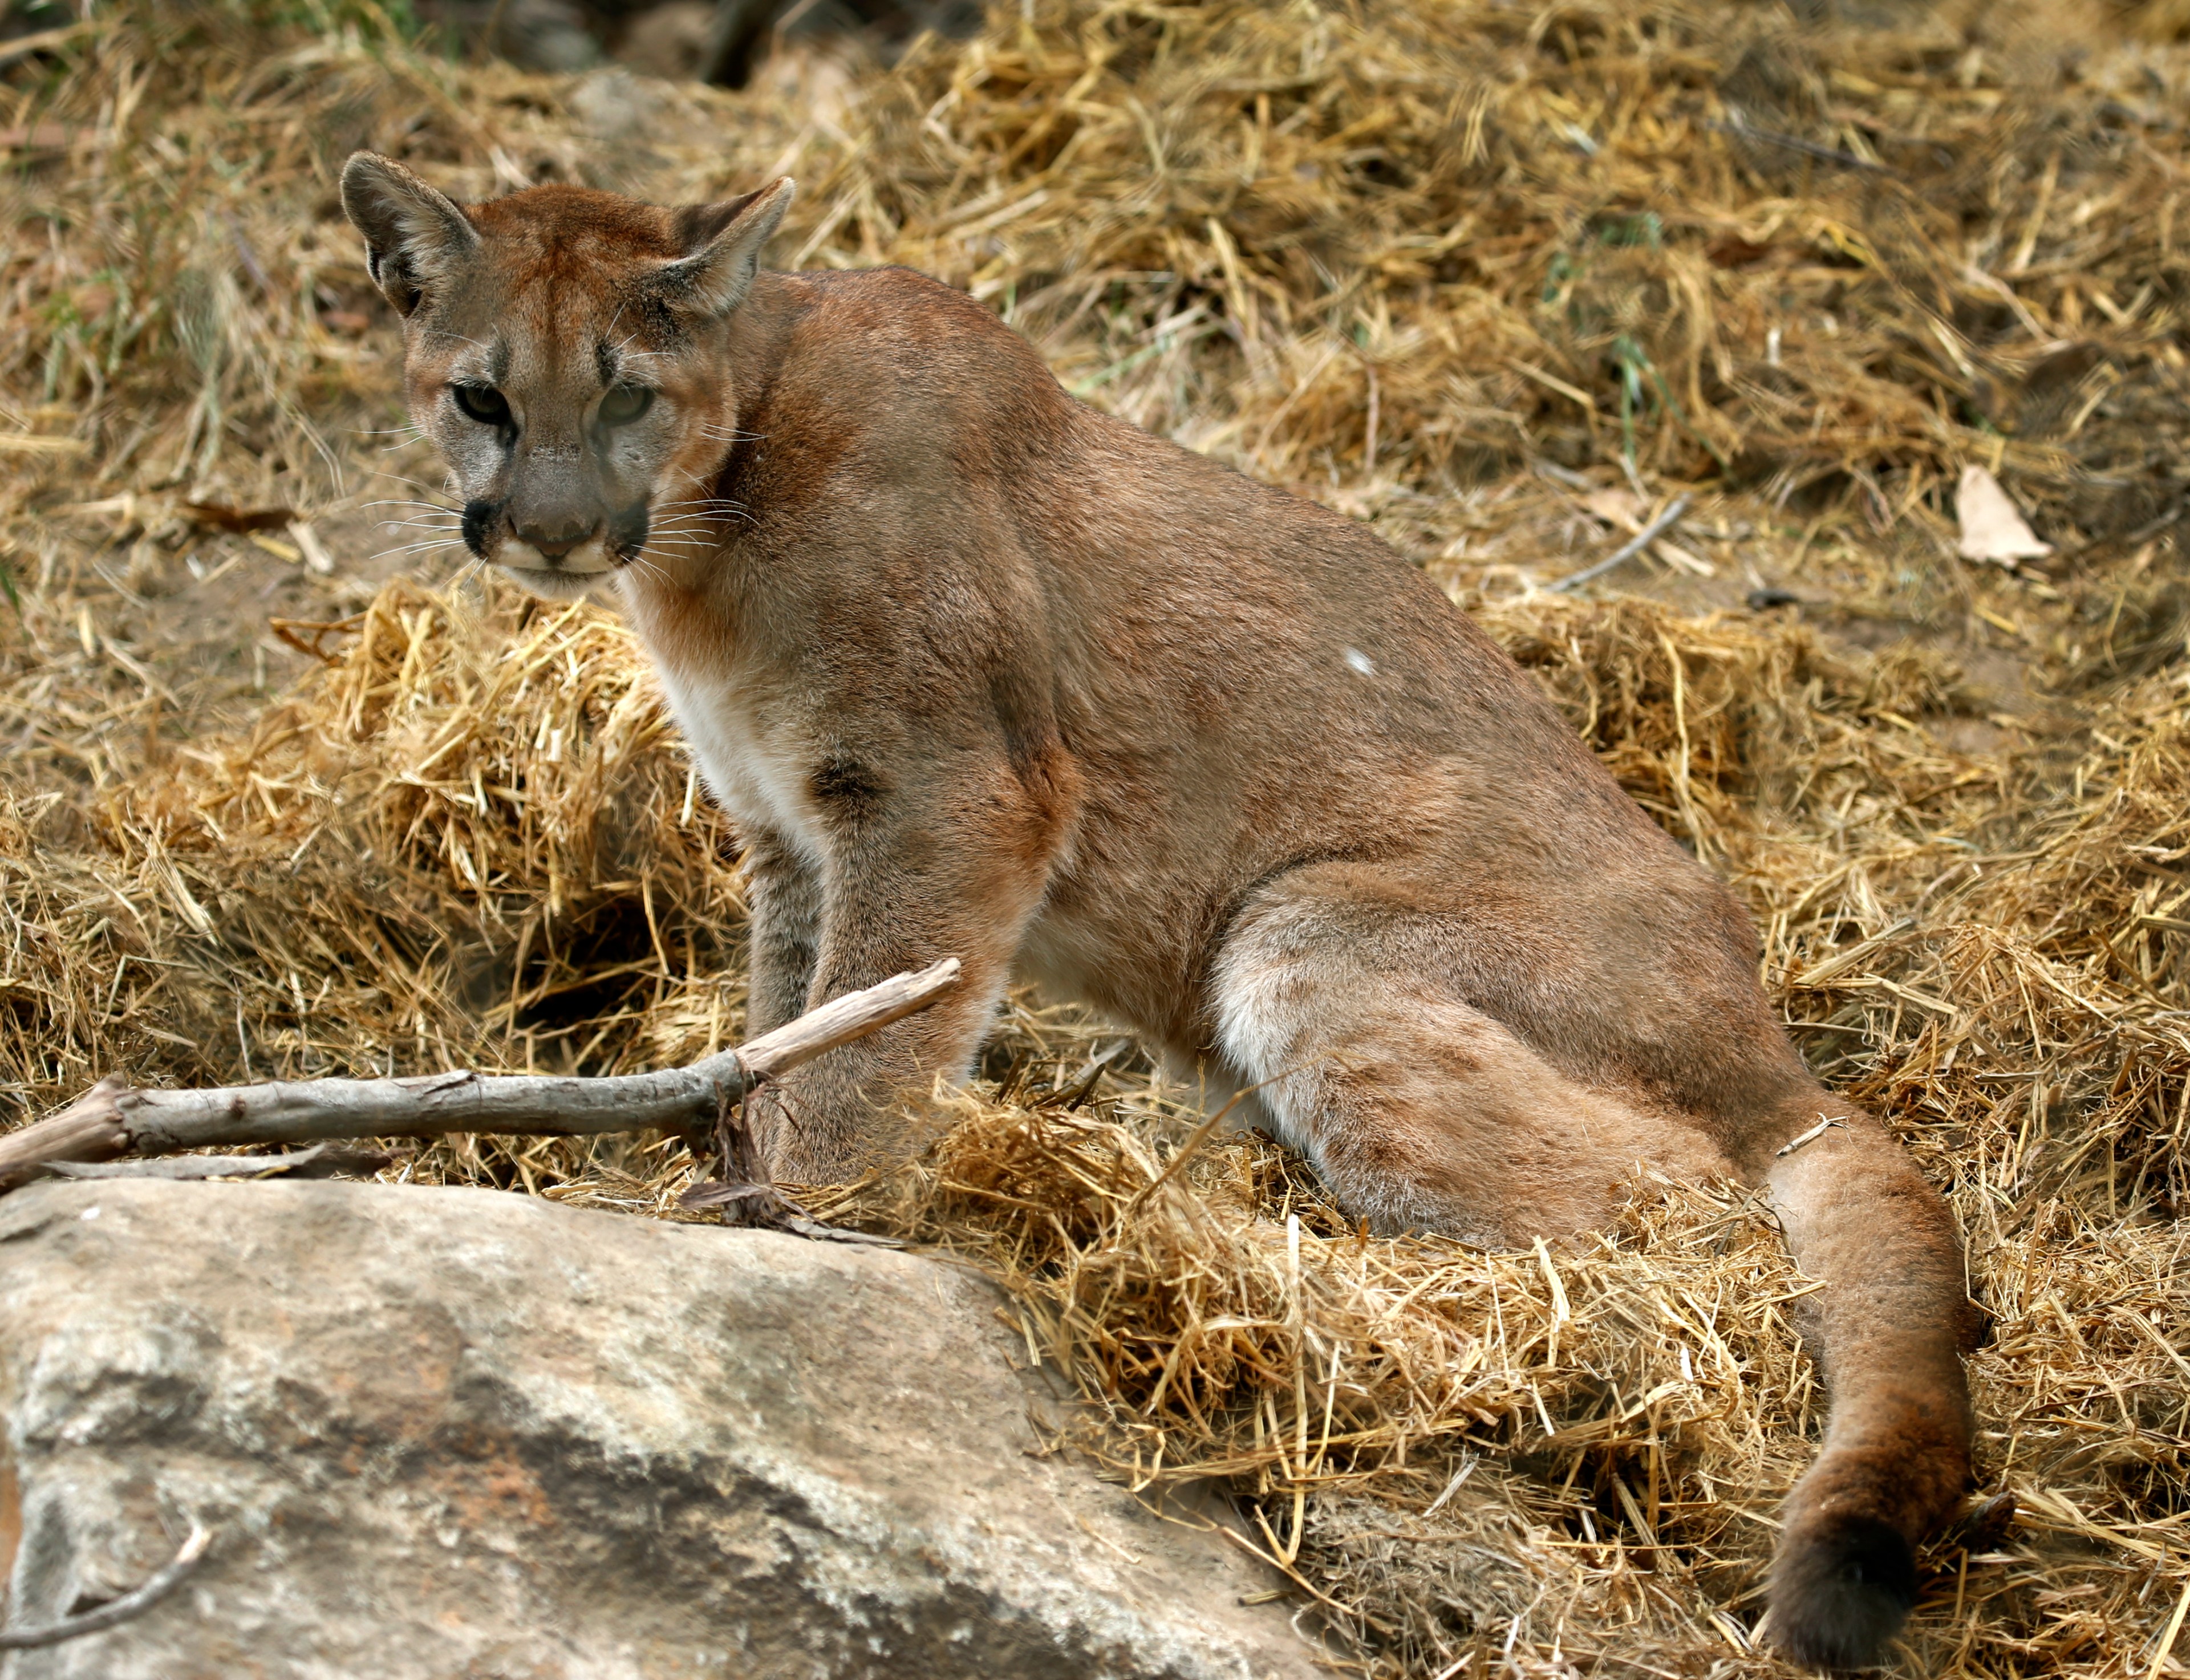 A mountain lion is sitting on dry grass with a focused gaze, near a rock and a branch.